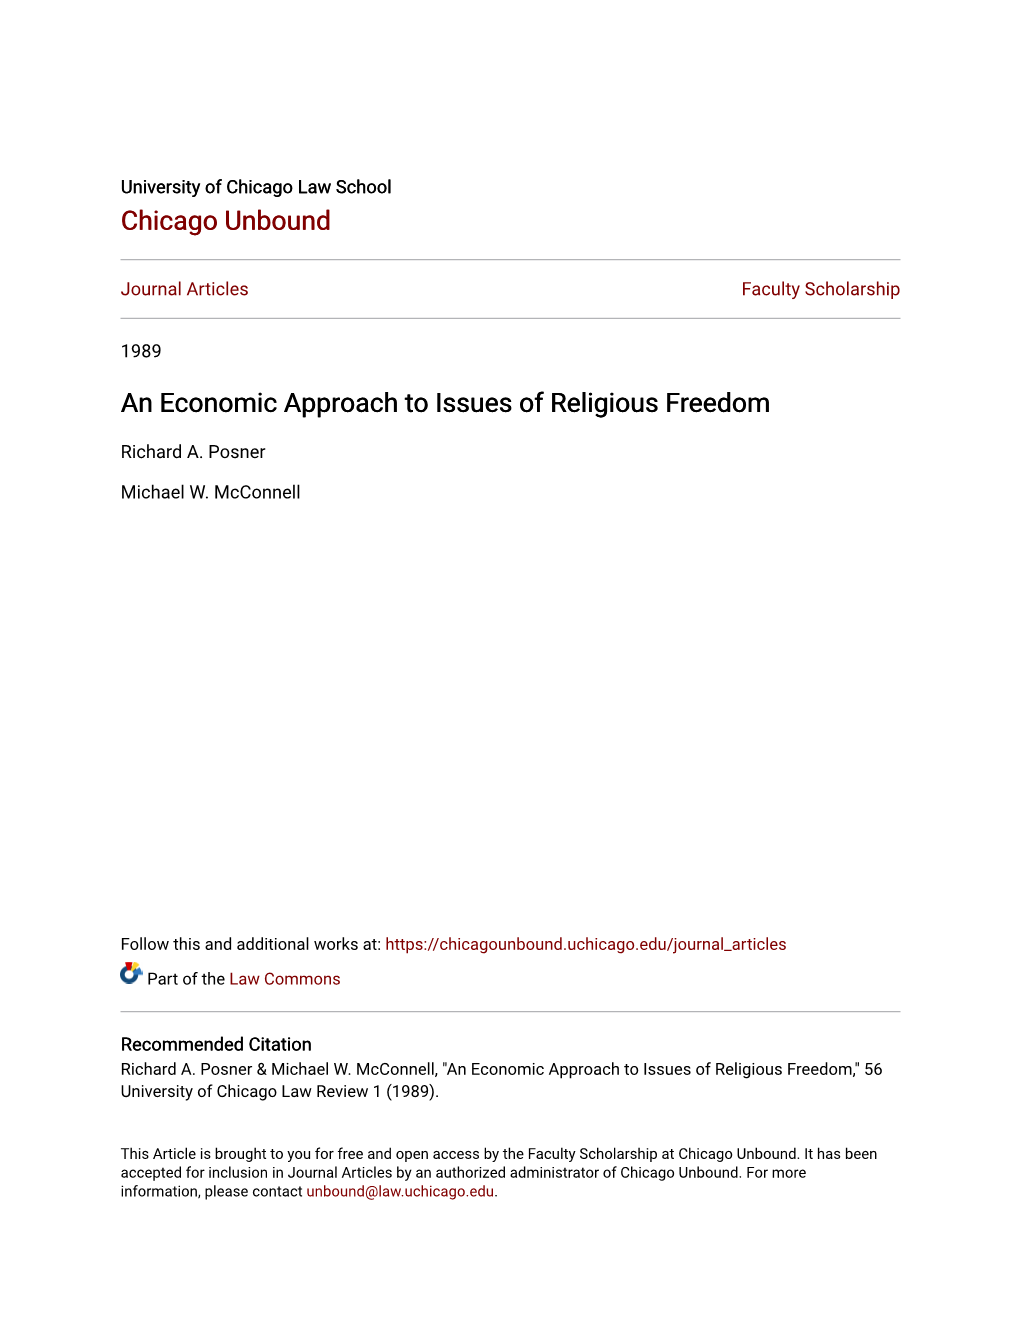 An Economic Approach to Issues of Religious Freedom